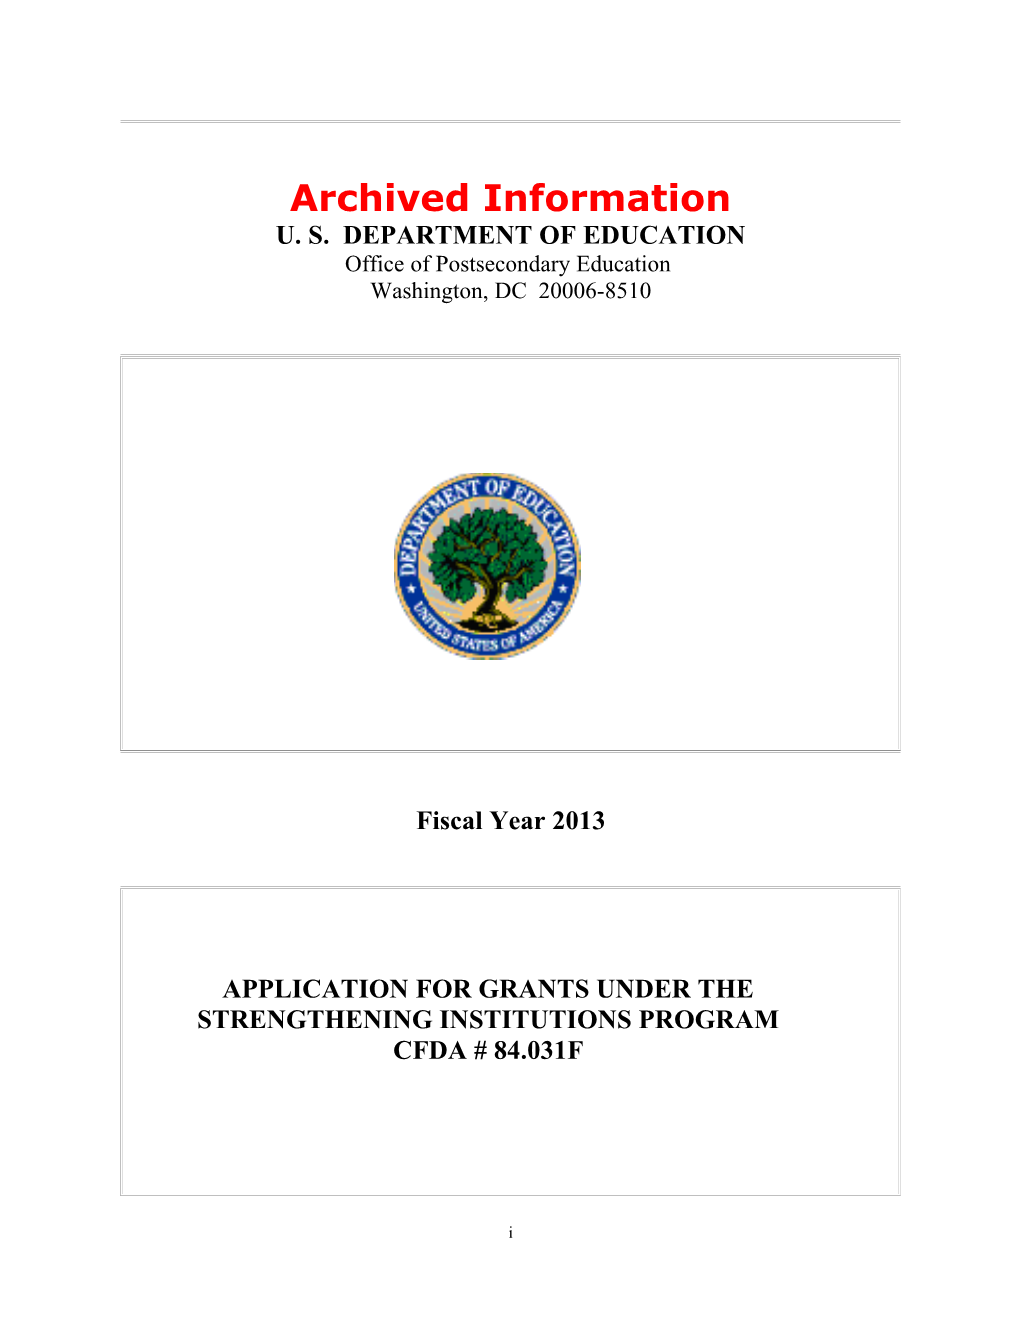 Archived FY 2013 Grant Application Under the Title III Part F Strengthening Institutions